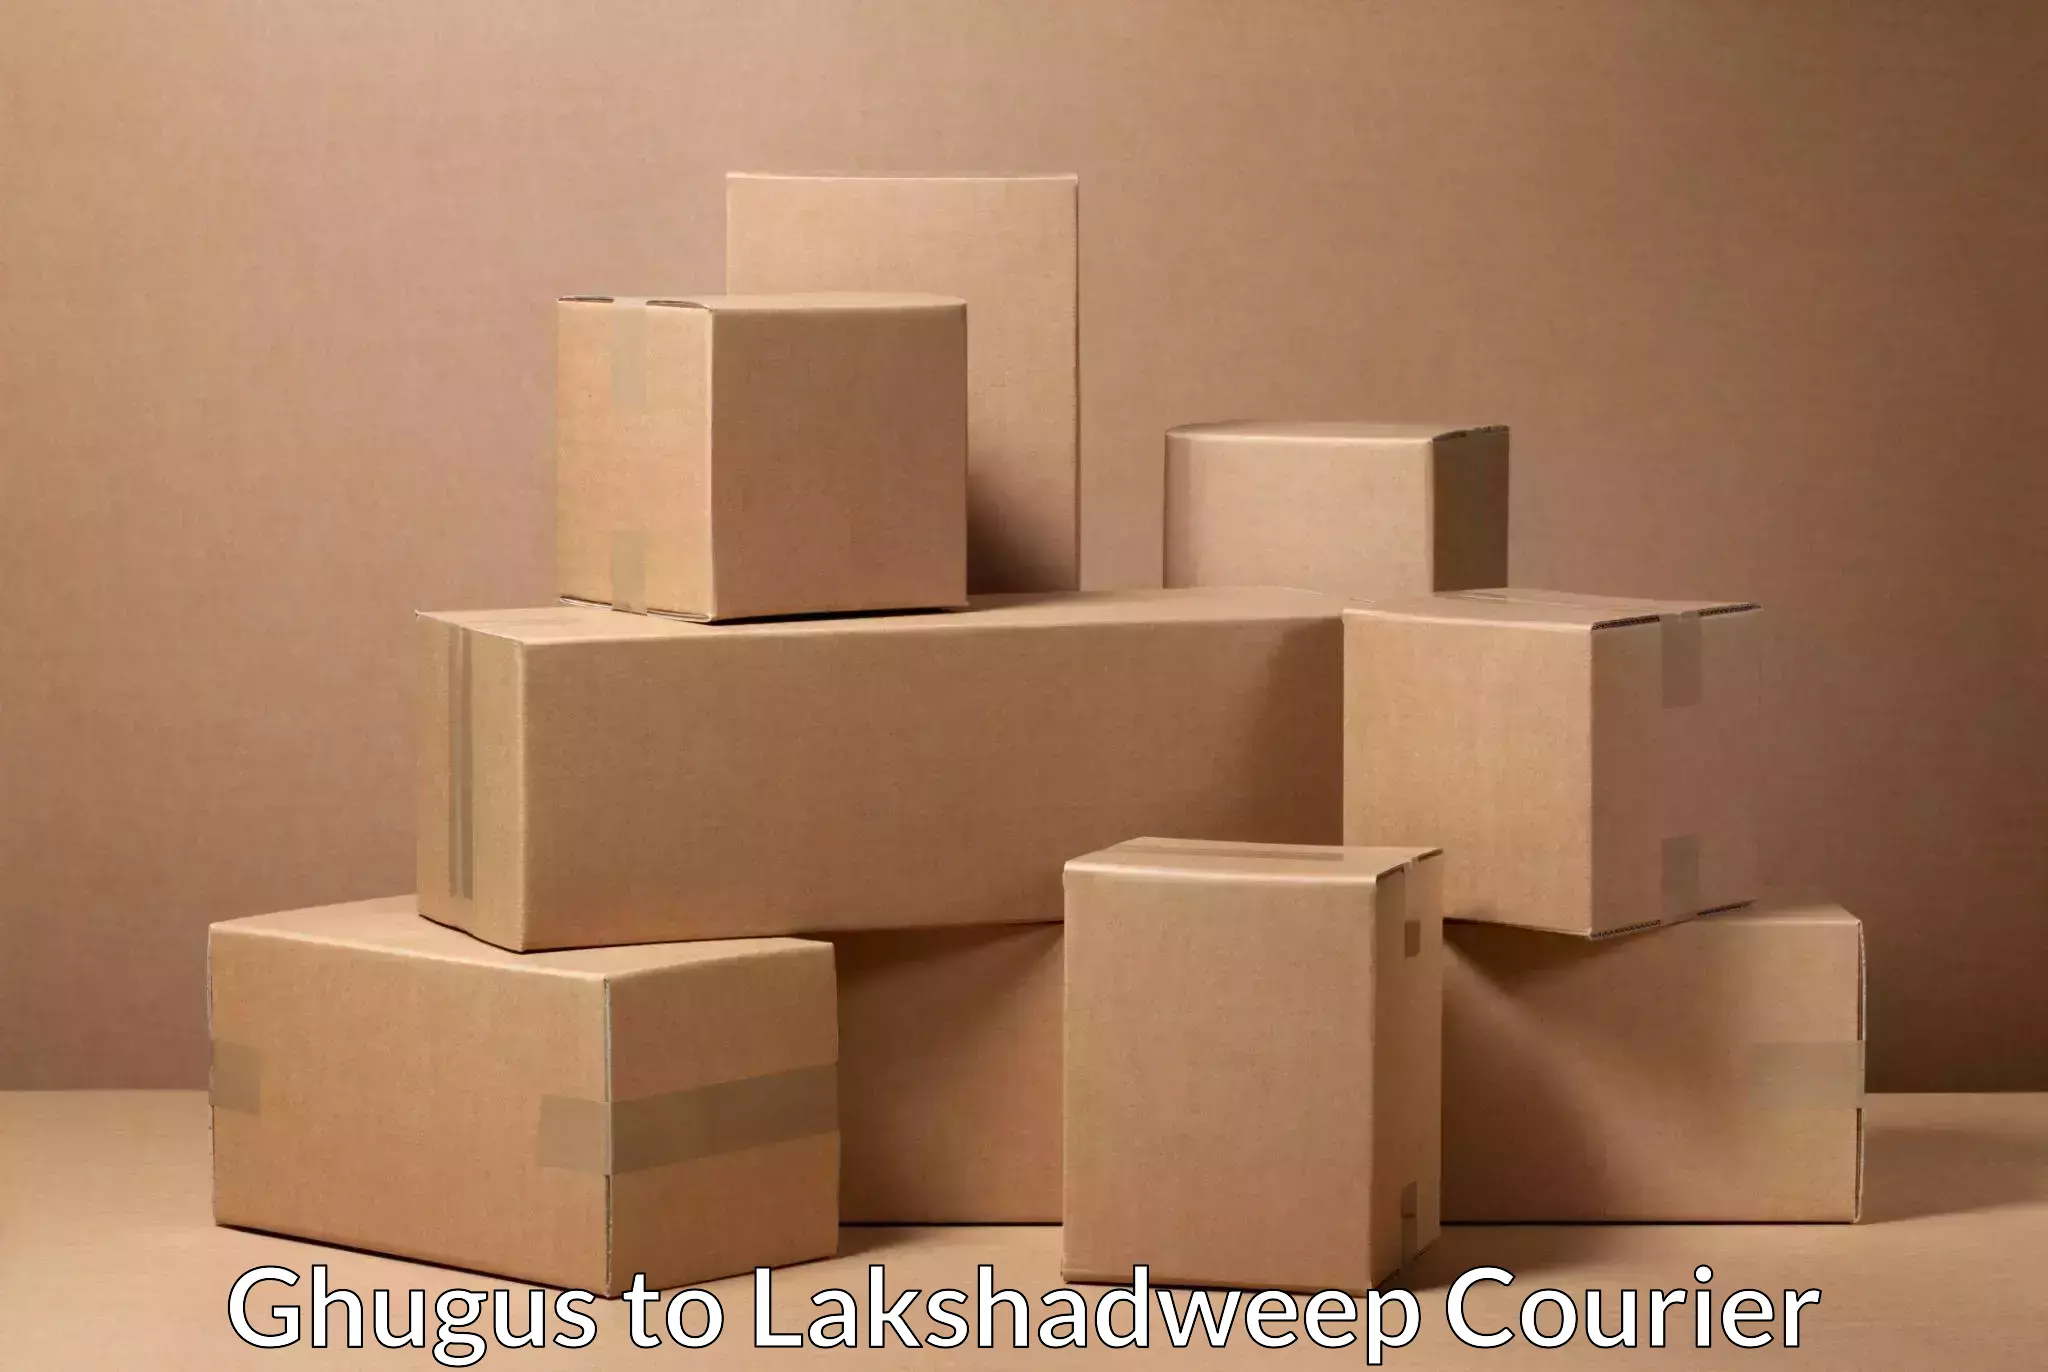 End-to-end delivery Ghugus to Lakshadweep